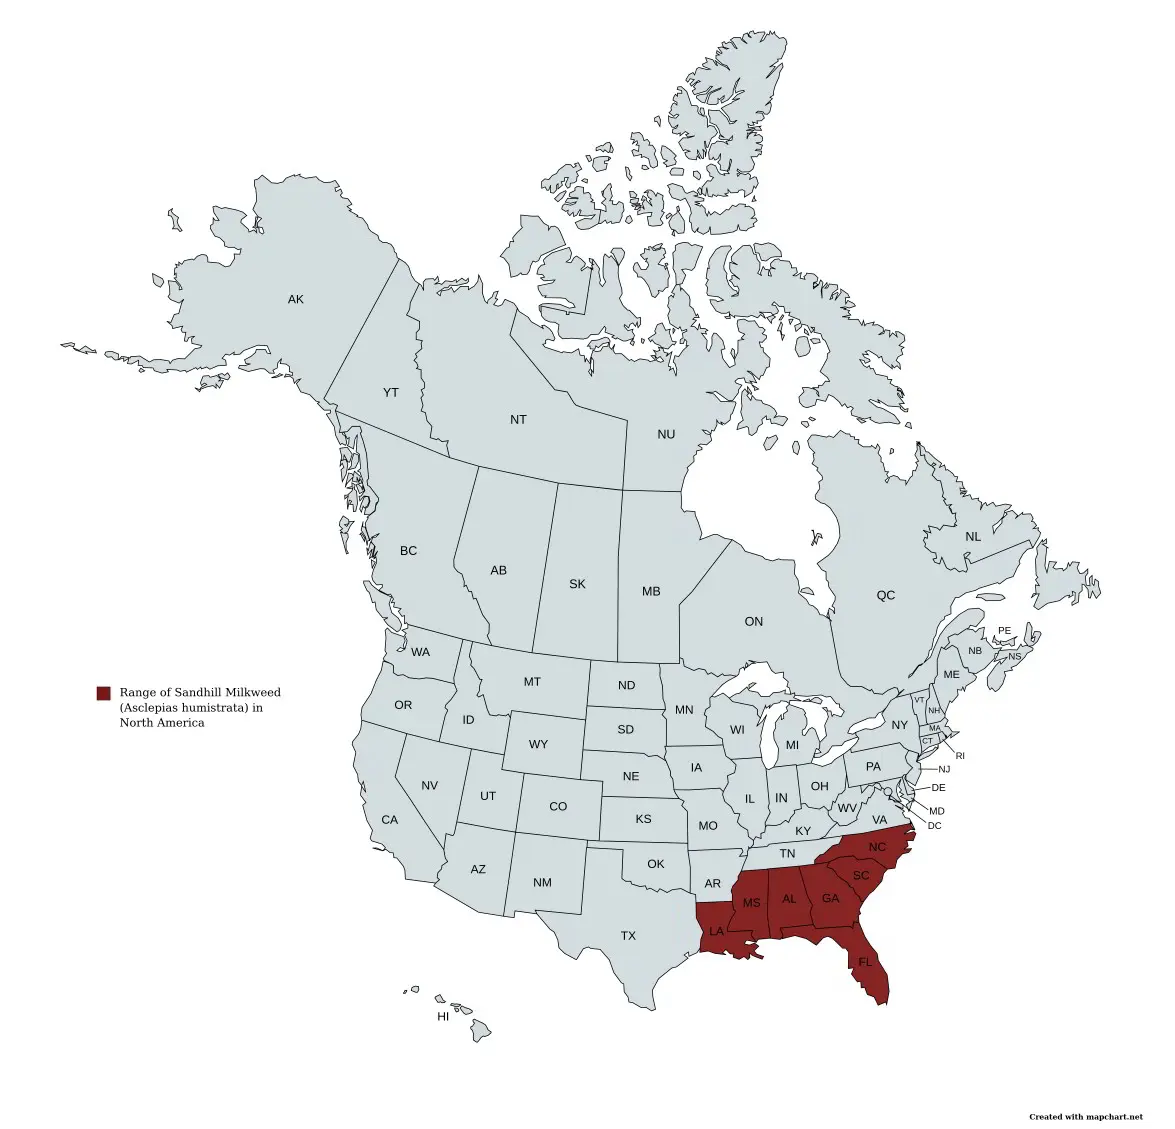 Range Map of Sandhill Milkweed (Asclepias humistrata) in the United States and Canada.